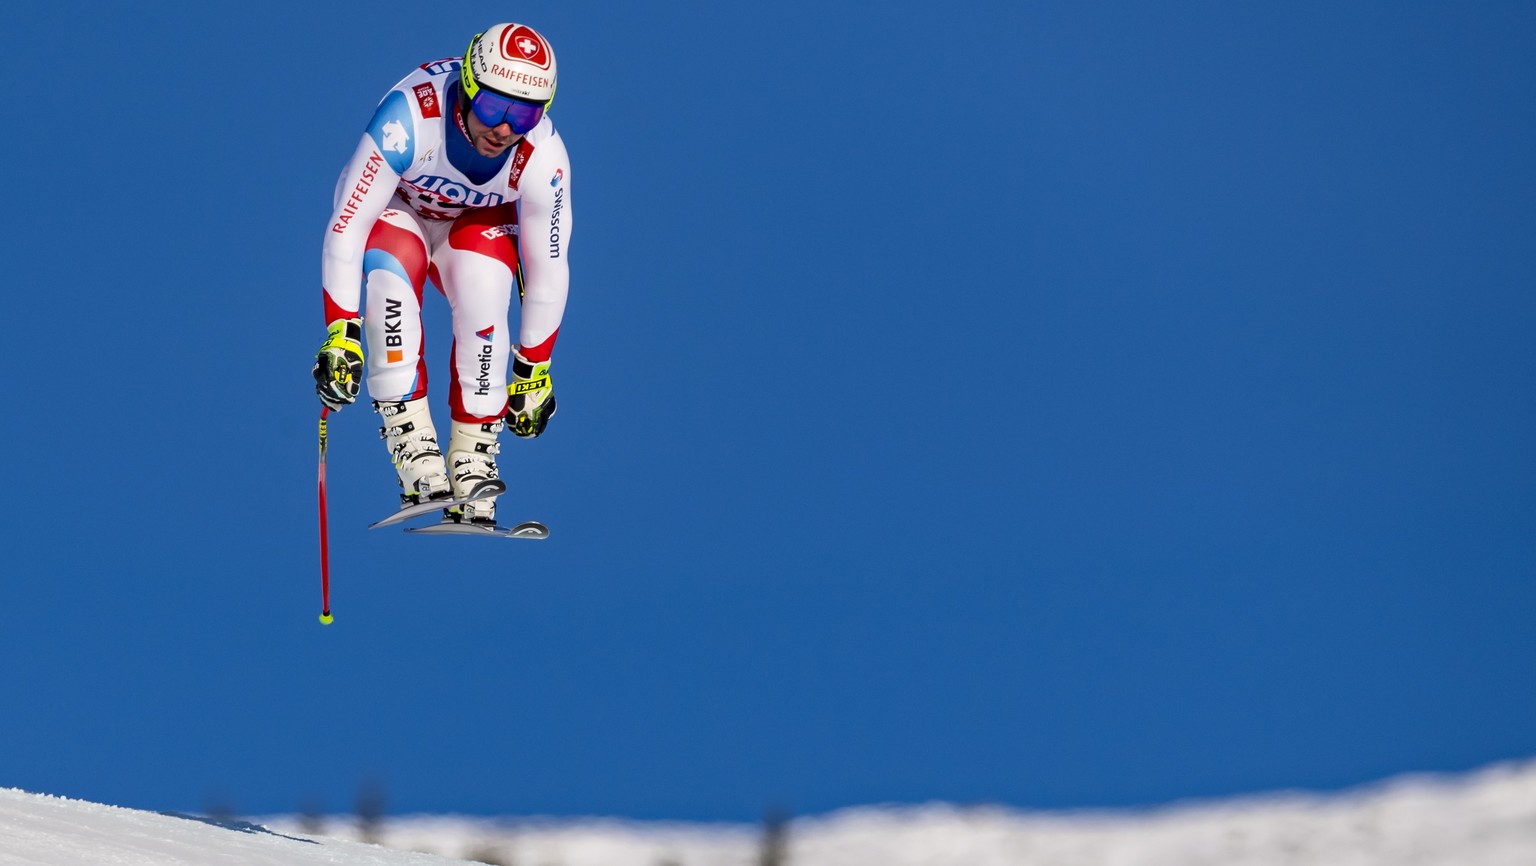 epa07350058 Beat Feuz of Switzerland in action during the men downhill training at the 2019 FIS Alpine Skiing World Championships in Are, Sweden, 07 February 2019. EPA/JEAN-CHRISTOPHE BOTT